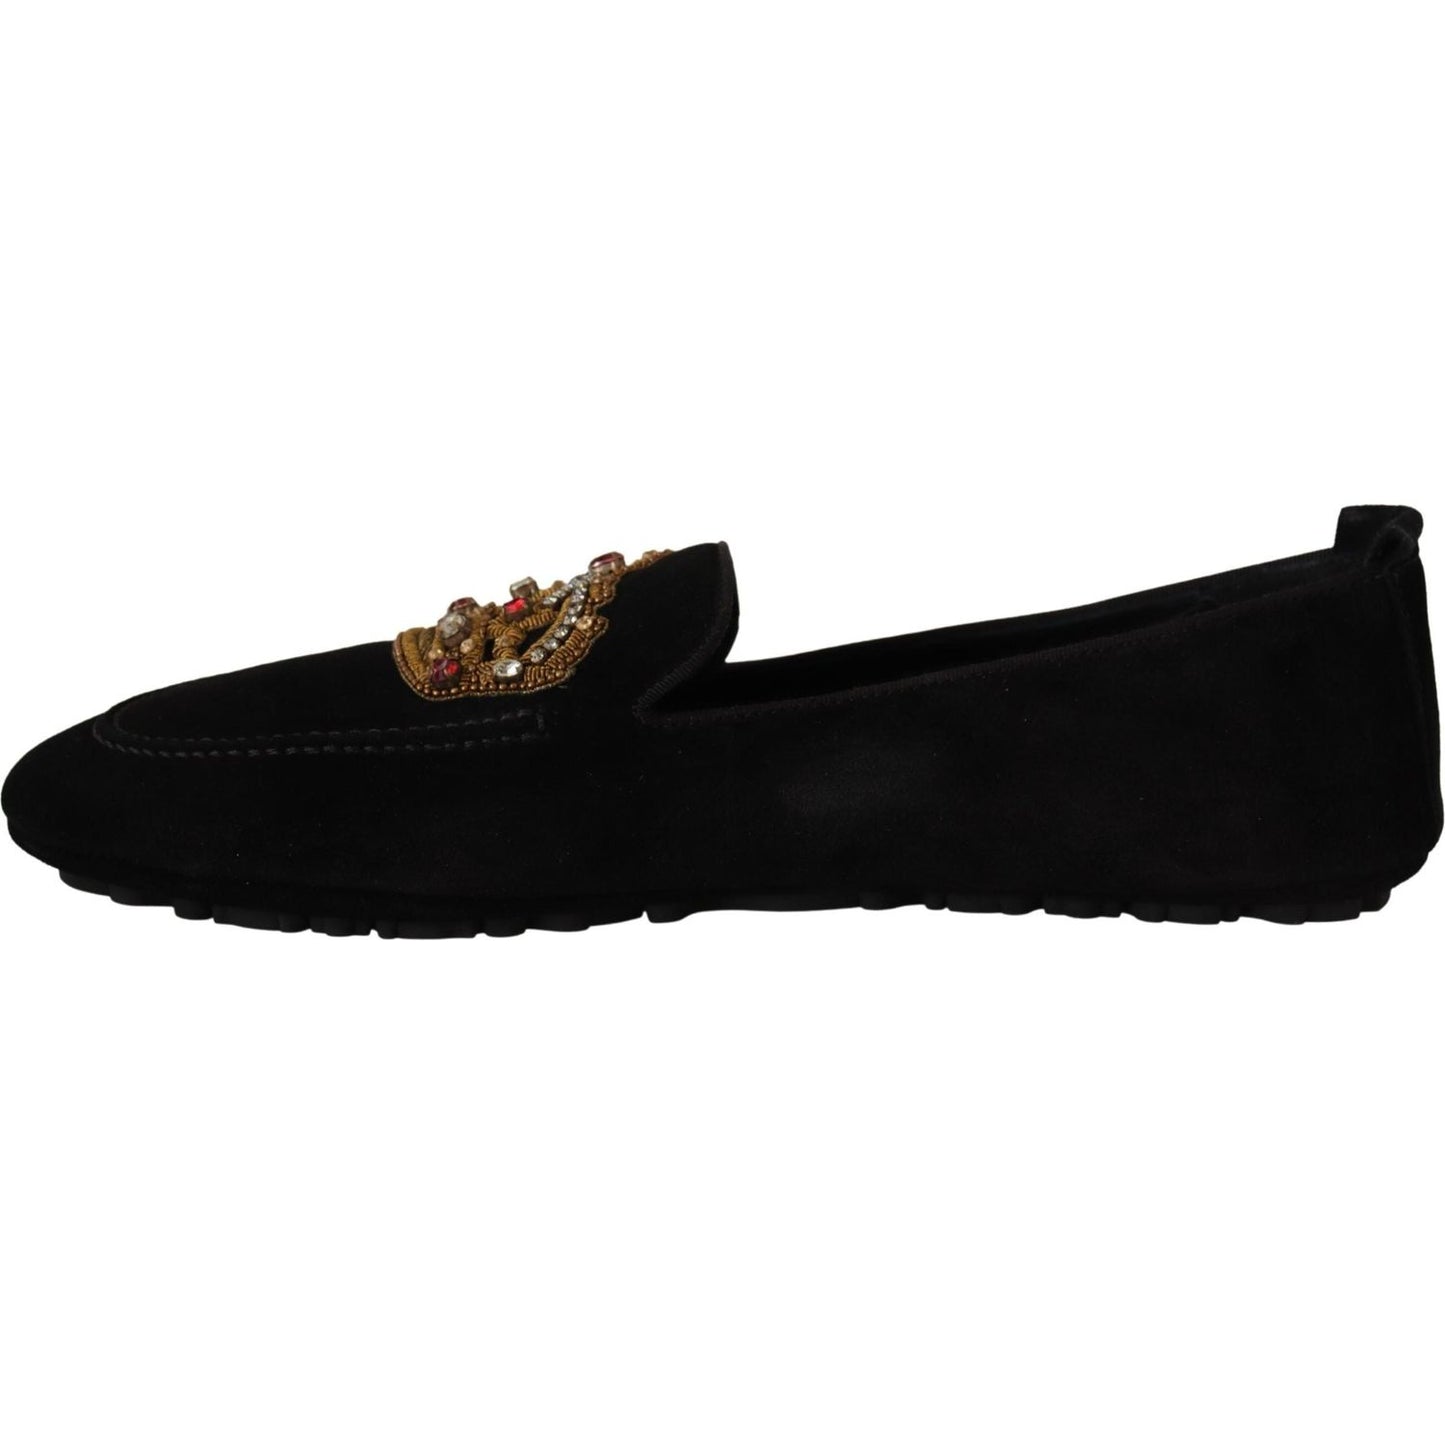 Dolce & Gabbana Elegant Black Leather Loafer Slides with Gold Embroidery black-leather-crystal-gold-crown-loafers-shoes IMG_5287-scaled-9a9448db-876.jpg